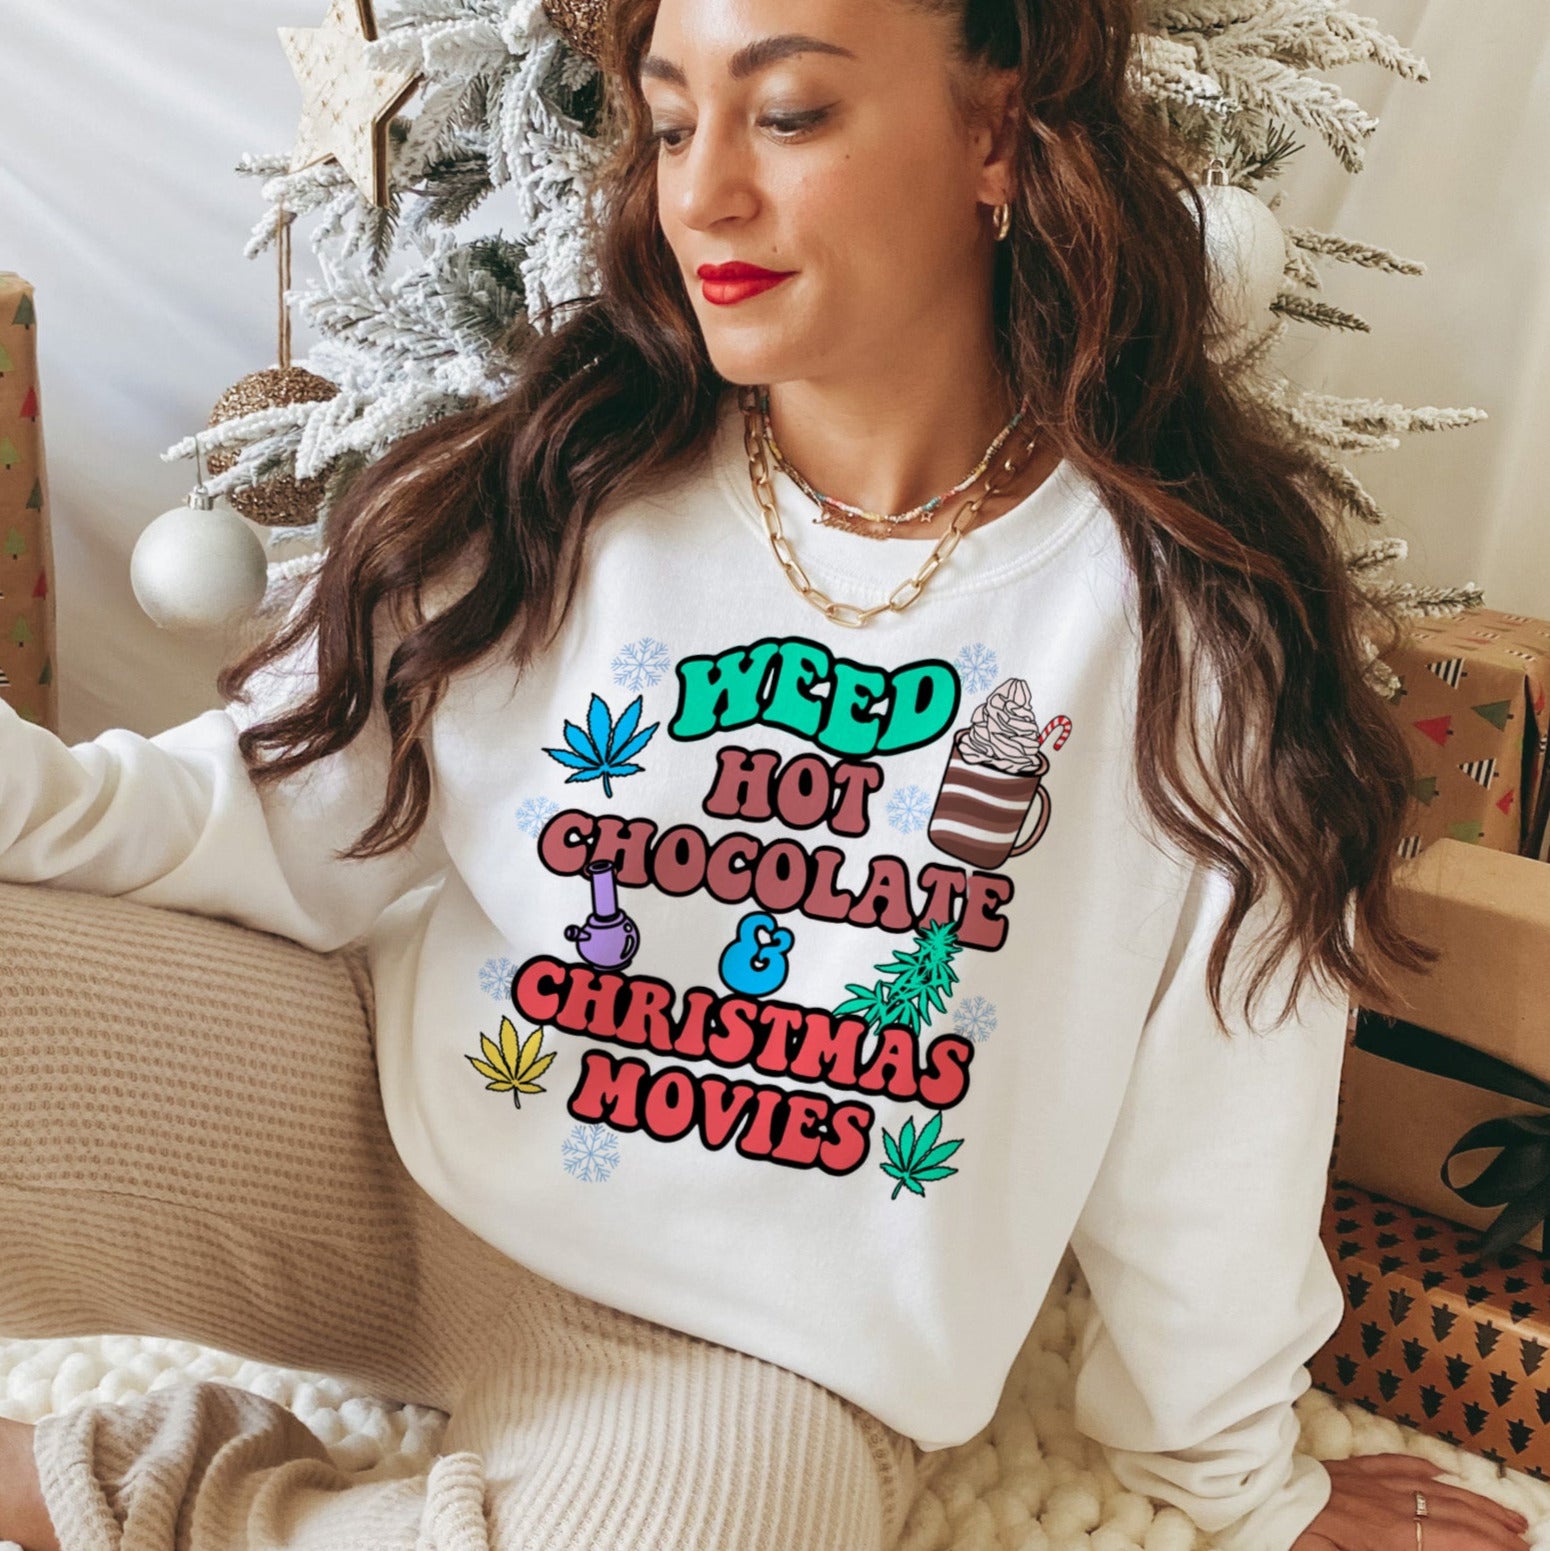 white sweater that says weed hot chocolate and christmas movies - HighCiti